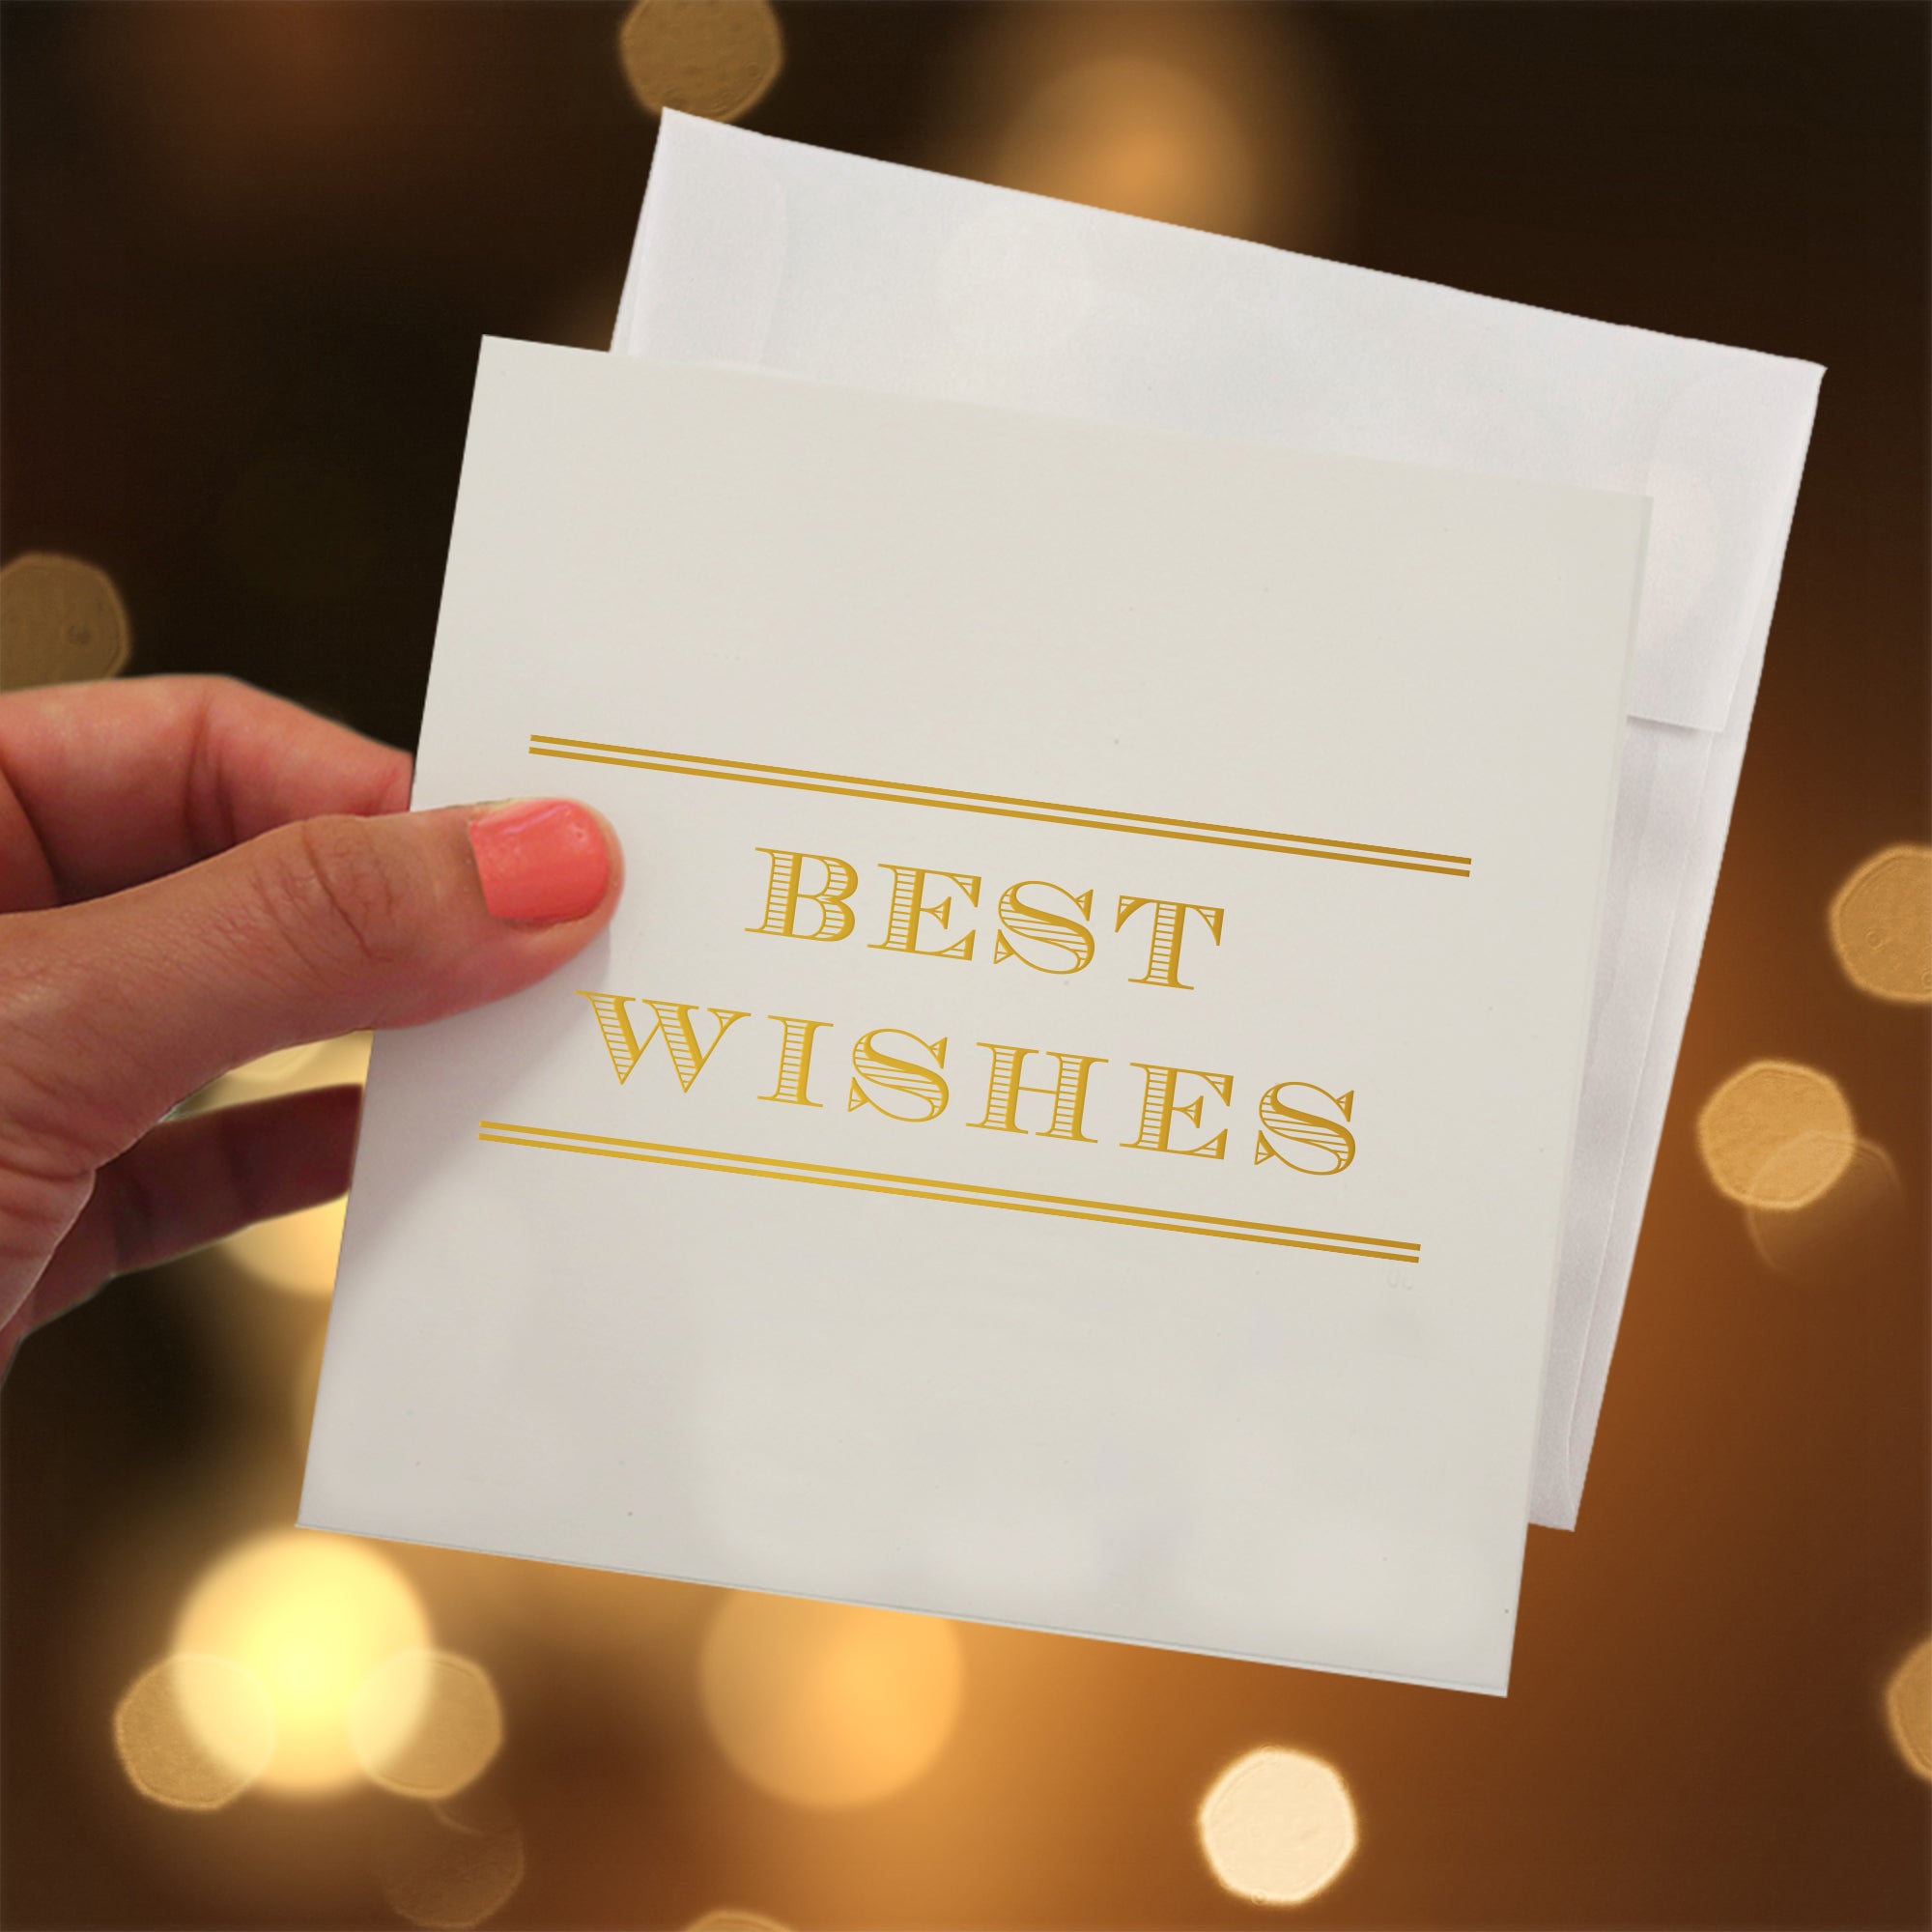 #87 best wishes - foil print